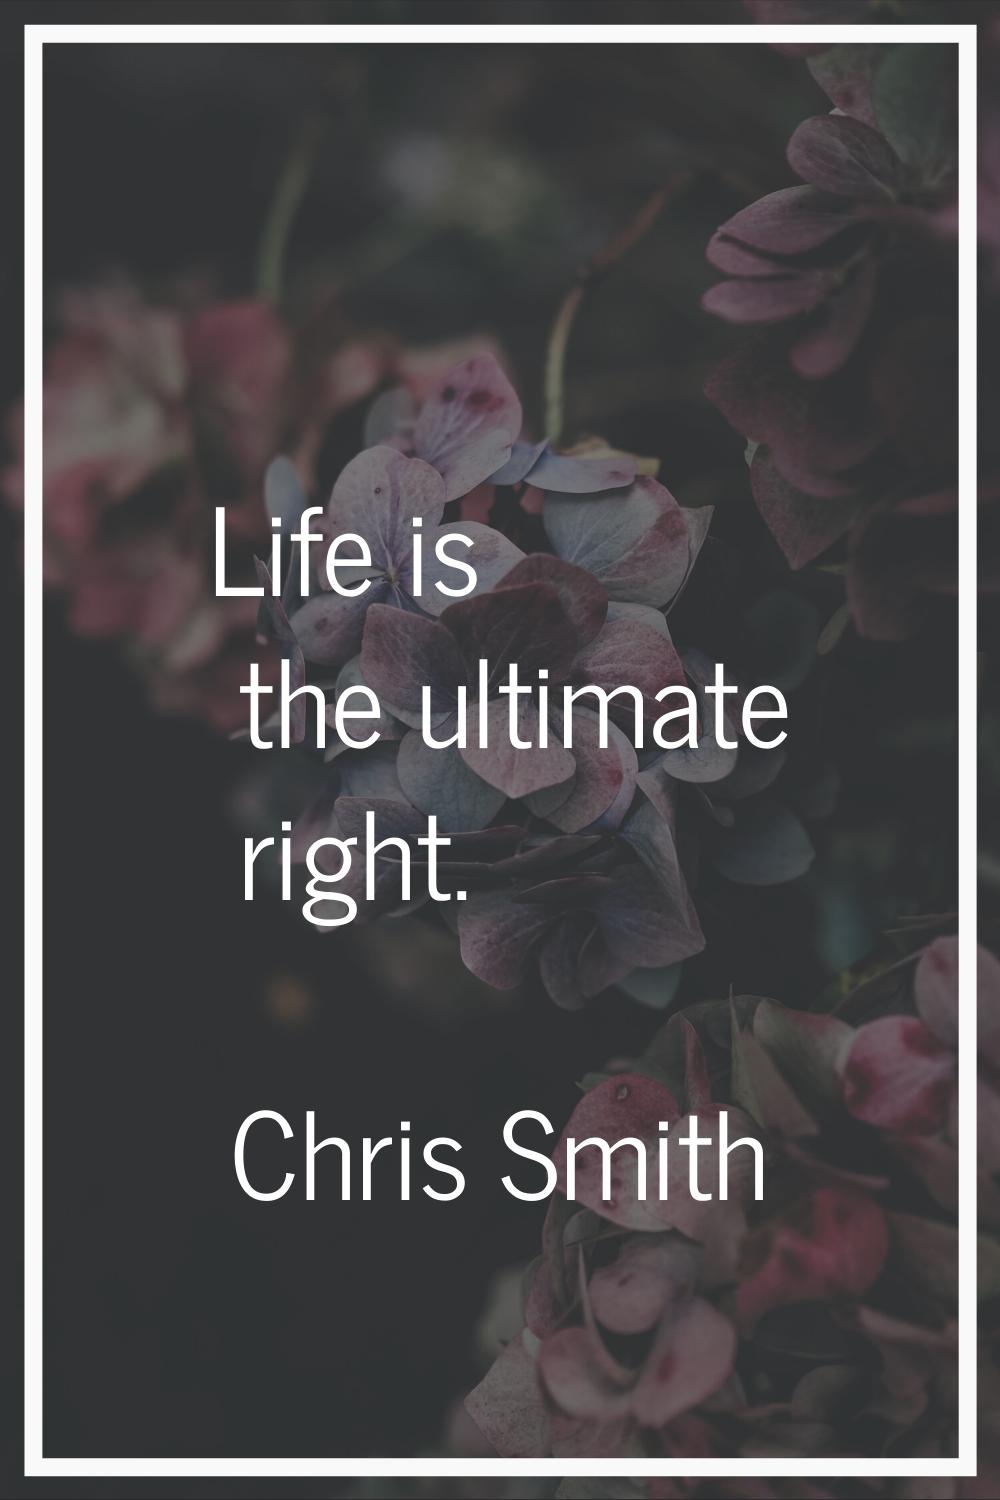 Life is the ultimate right.